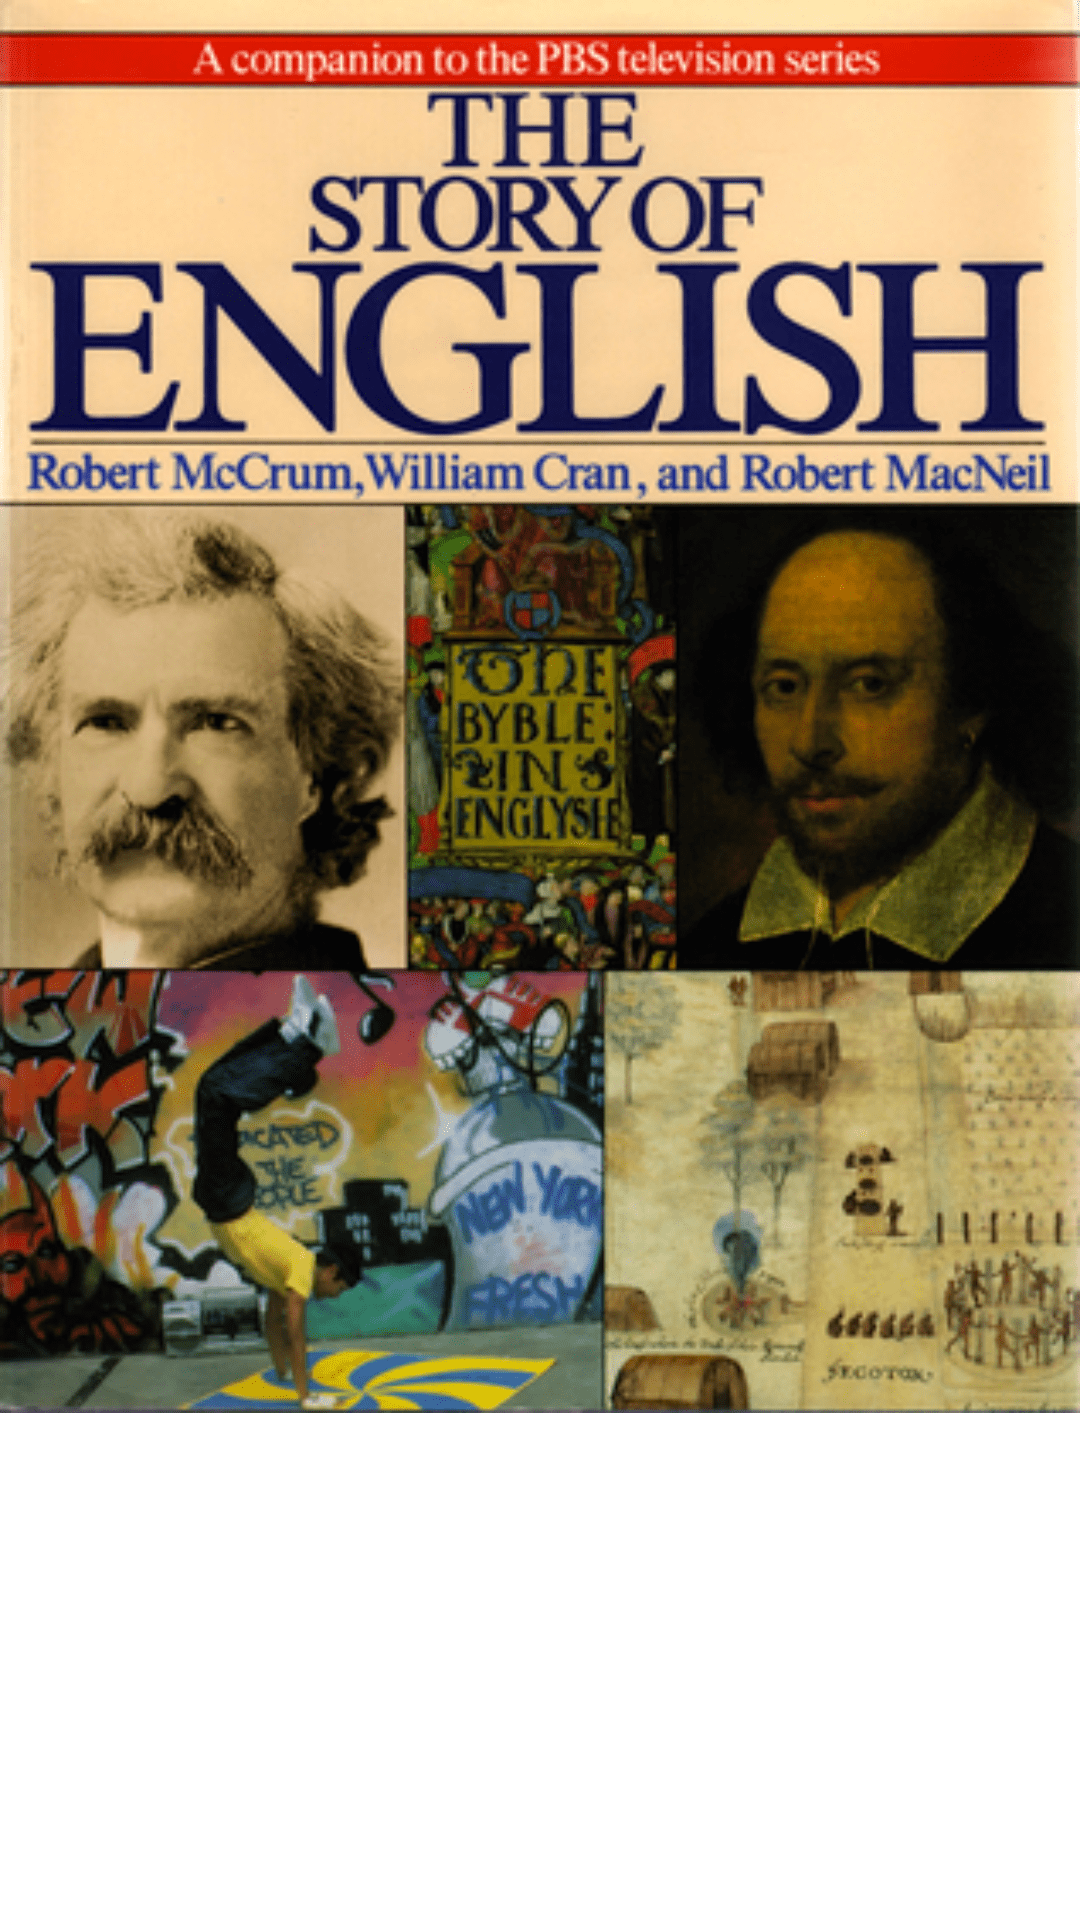 The Story of English by Robert McCrum